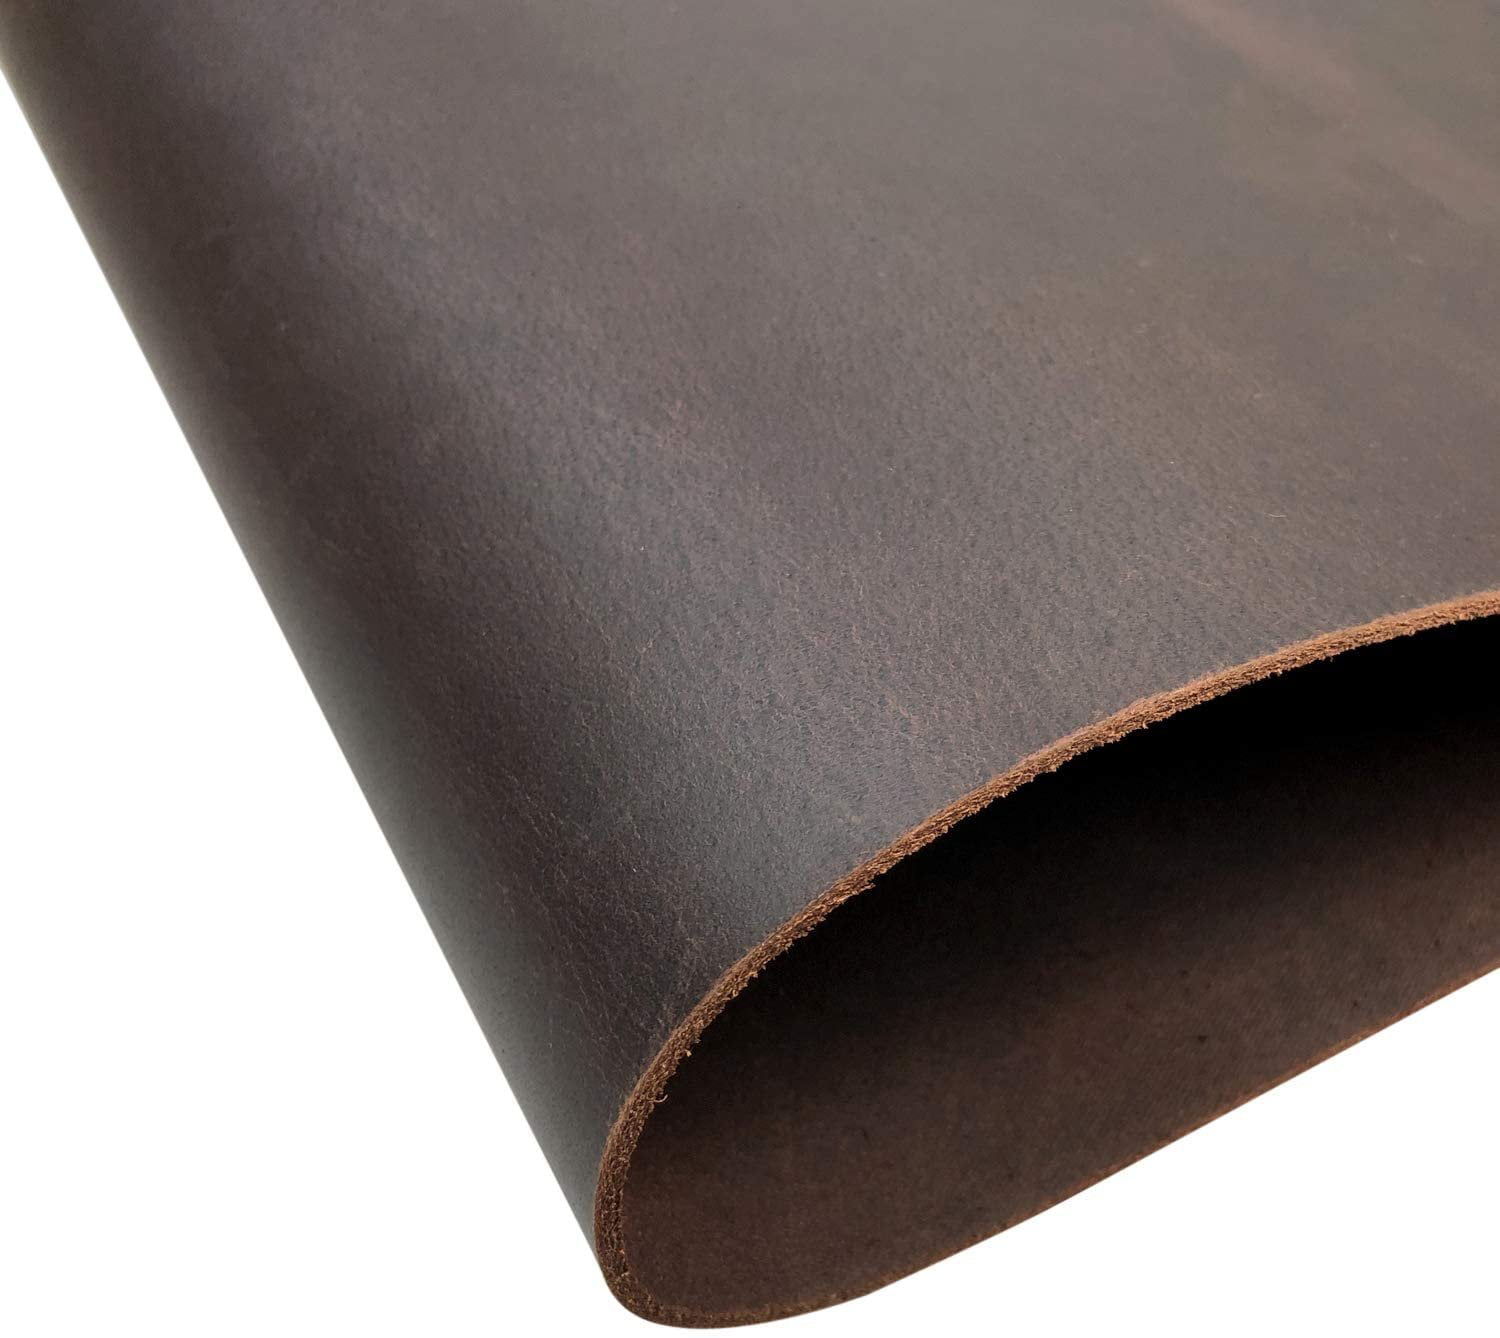 Jeereal Waterproof Suede Leather Sheet 2.0-2.2mm Thick Finished Suede  Cow-Hide Leather Crafts Tooling Sewing Hobby Workshop Crafting